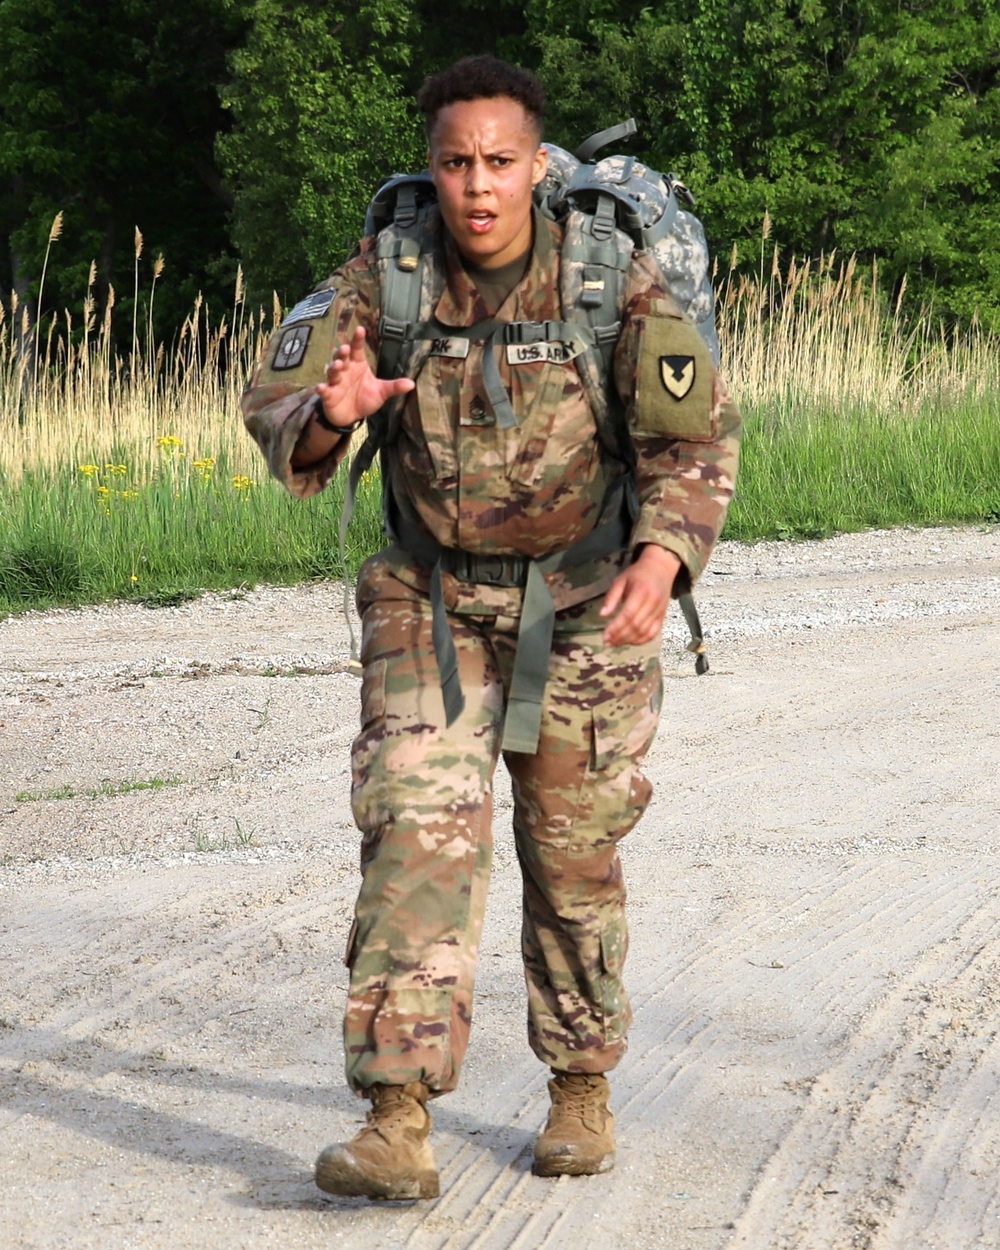 RIA Soldier achieves career goal, becomes newest SAMC member